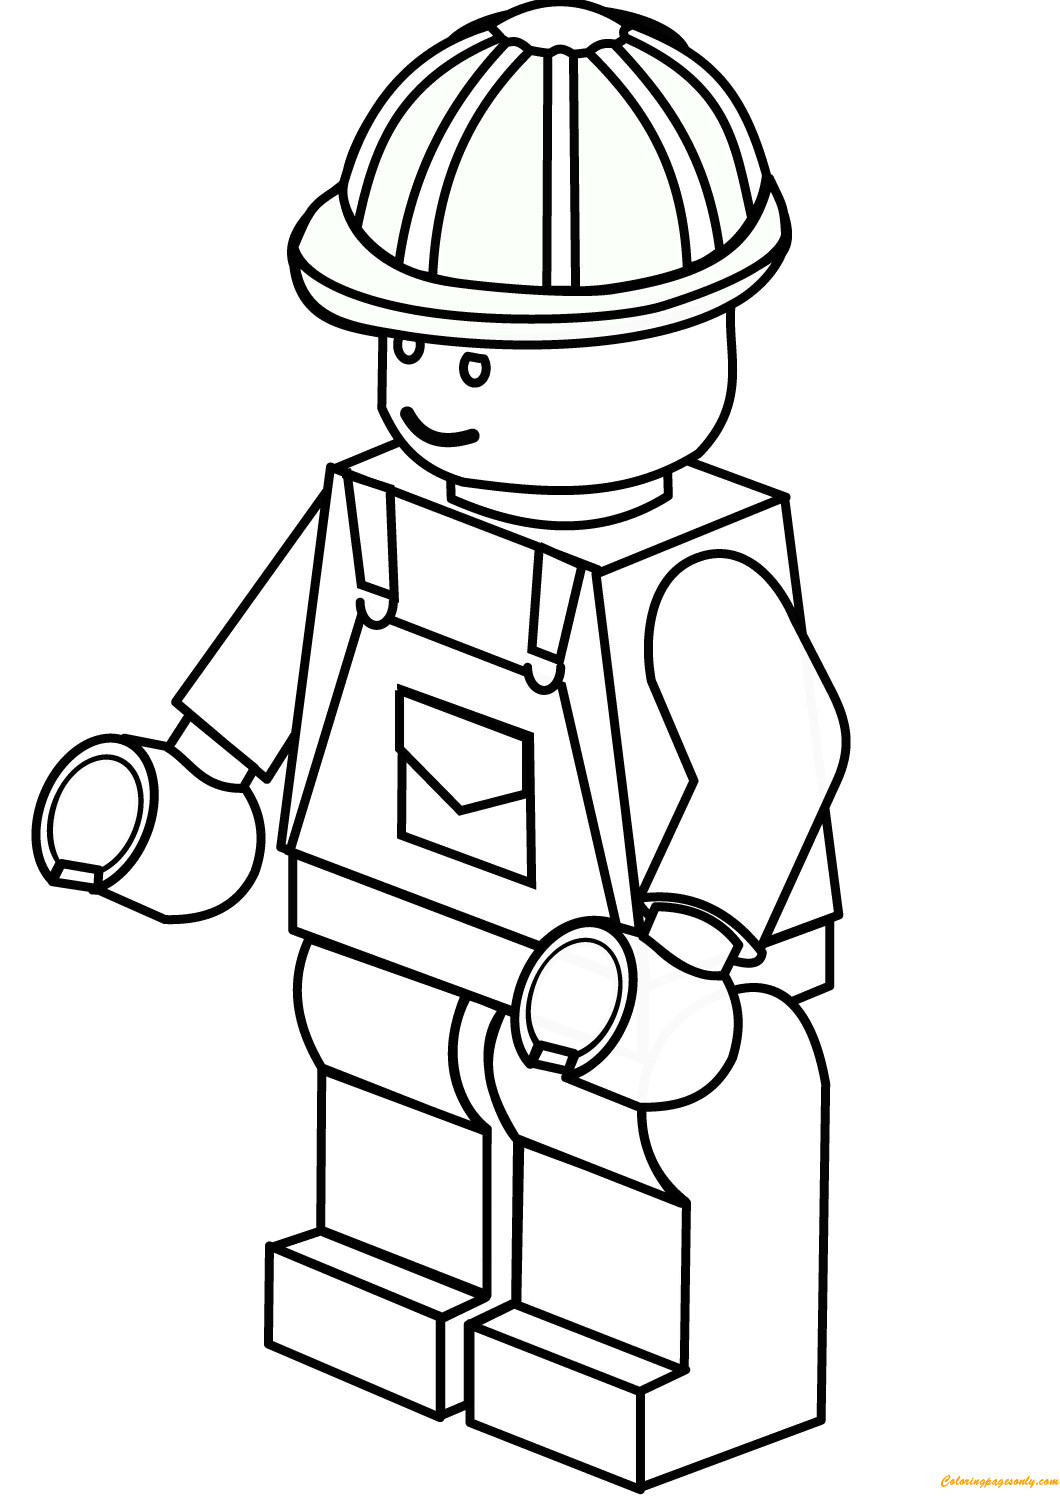 Free Printable Construction Coloring Pages at GetDrawings Free download